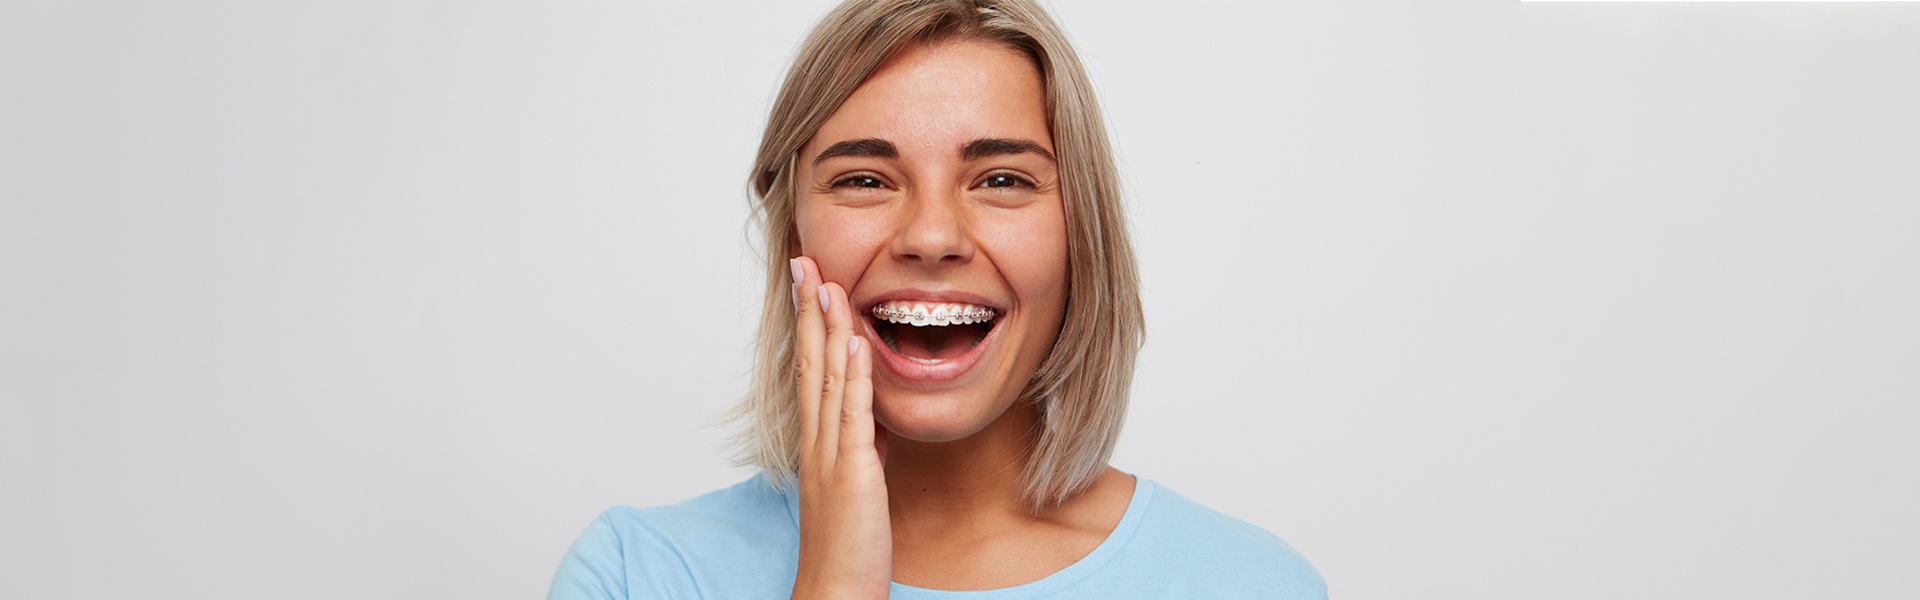 Are Invisalign Aligners Better Than Traditional Braces?